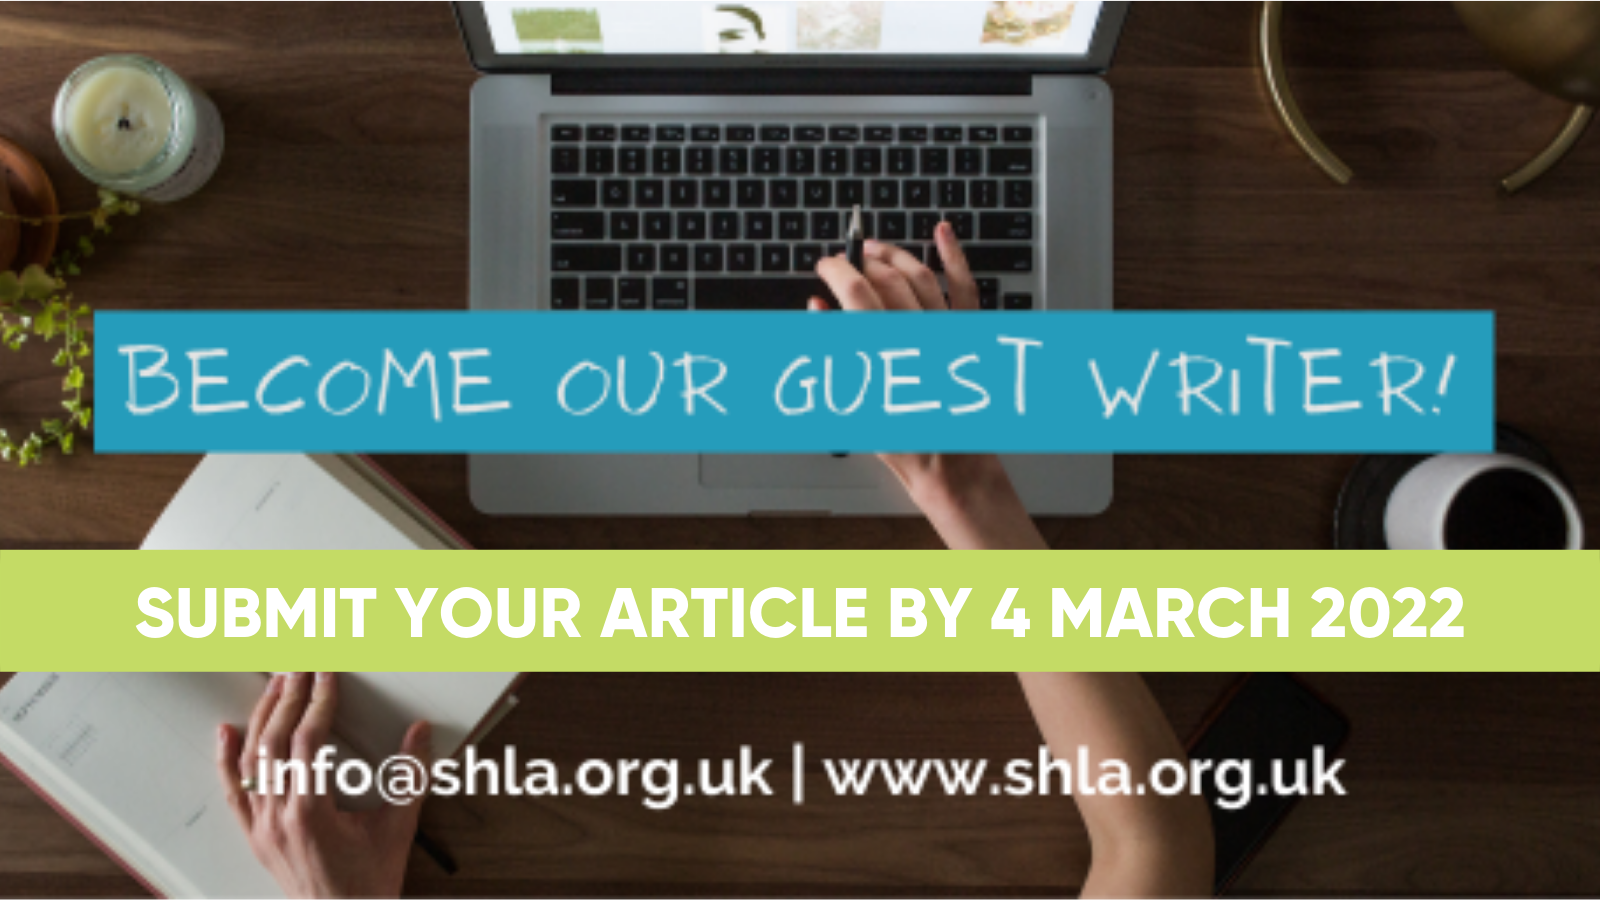 WILL YOU BE A GUEST WRITER FOR THE SHLA NEWSLETTER MARCH EDITION?